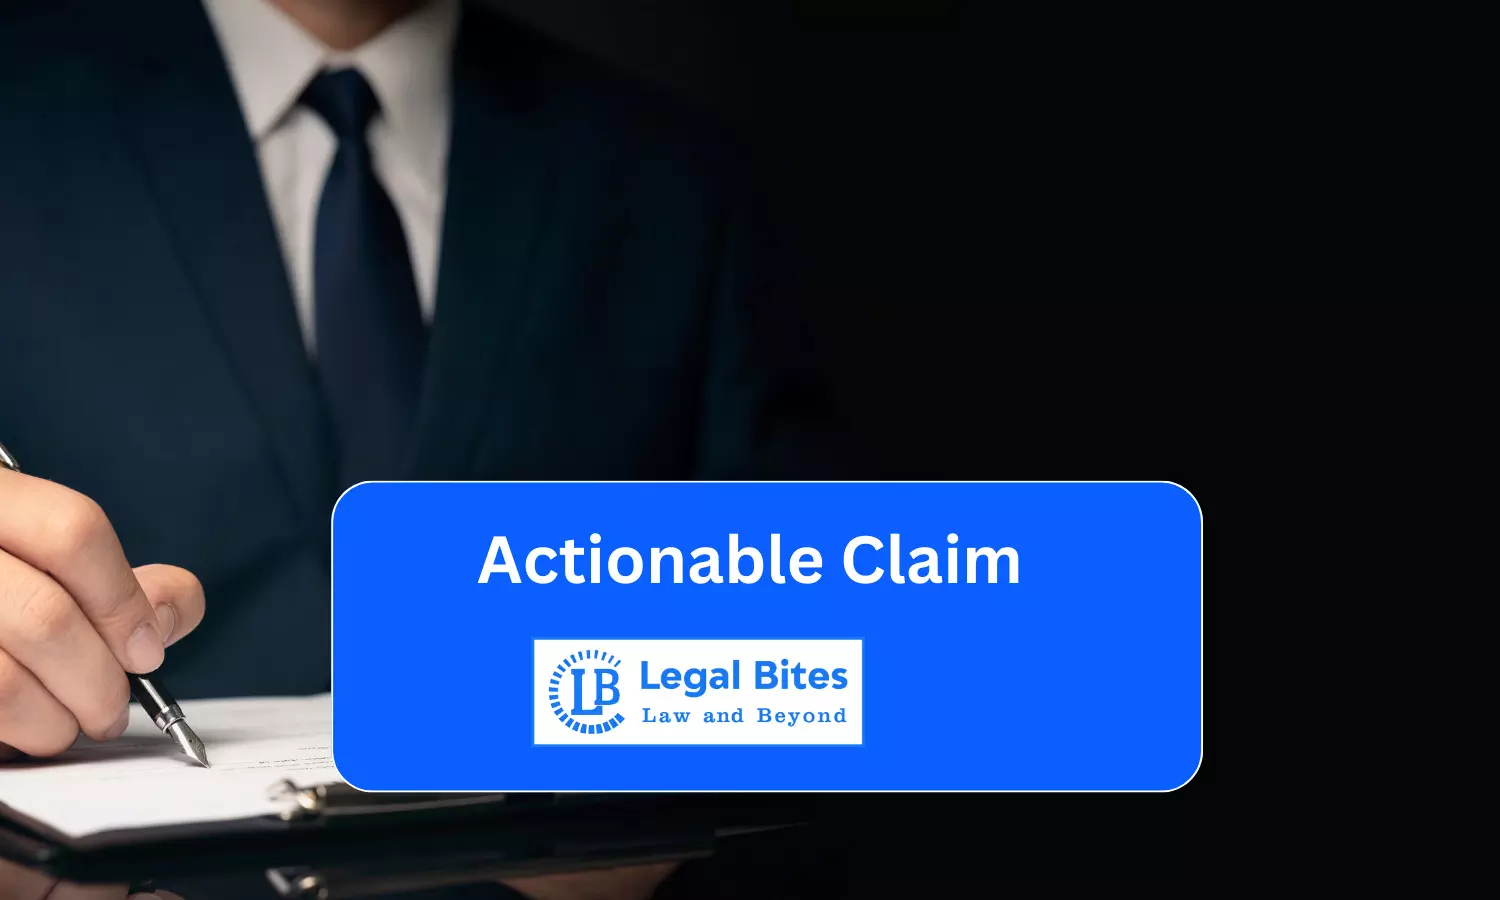 Actionable Claim under Property Law